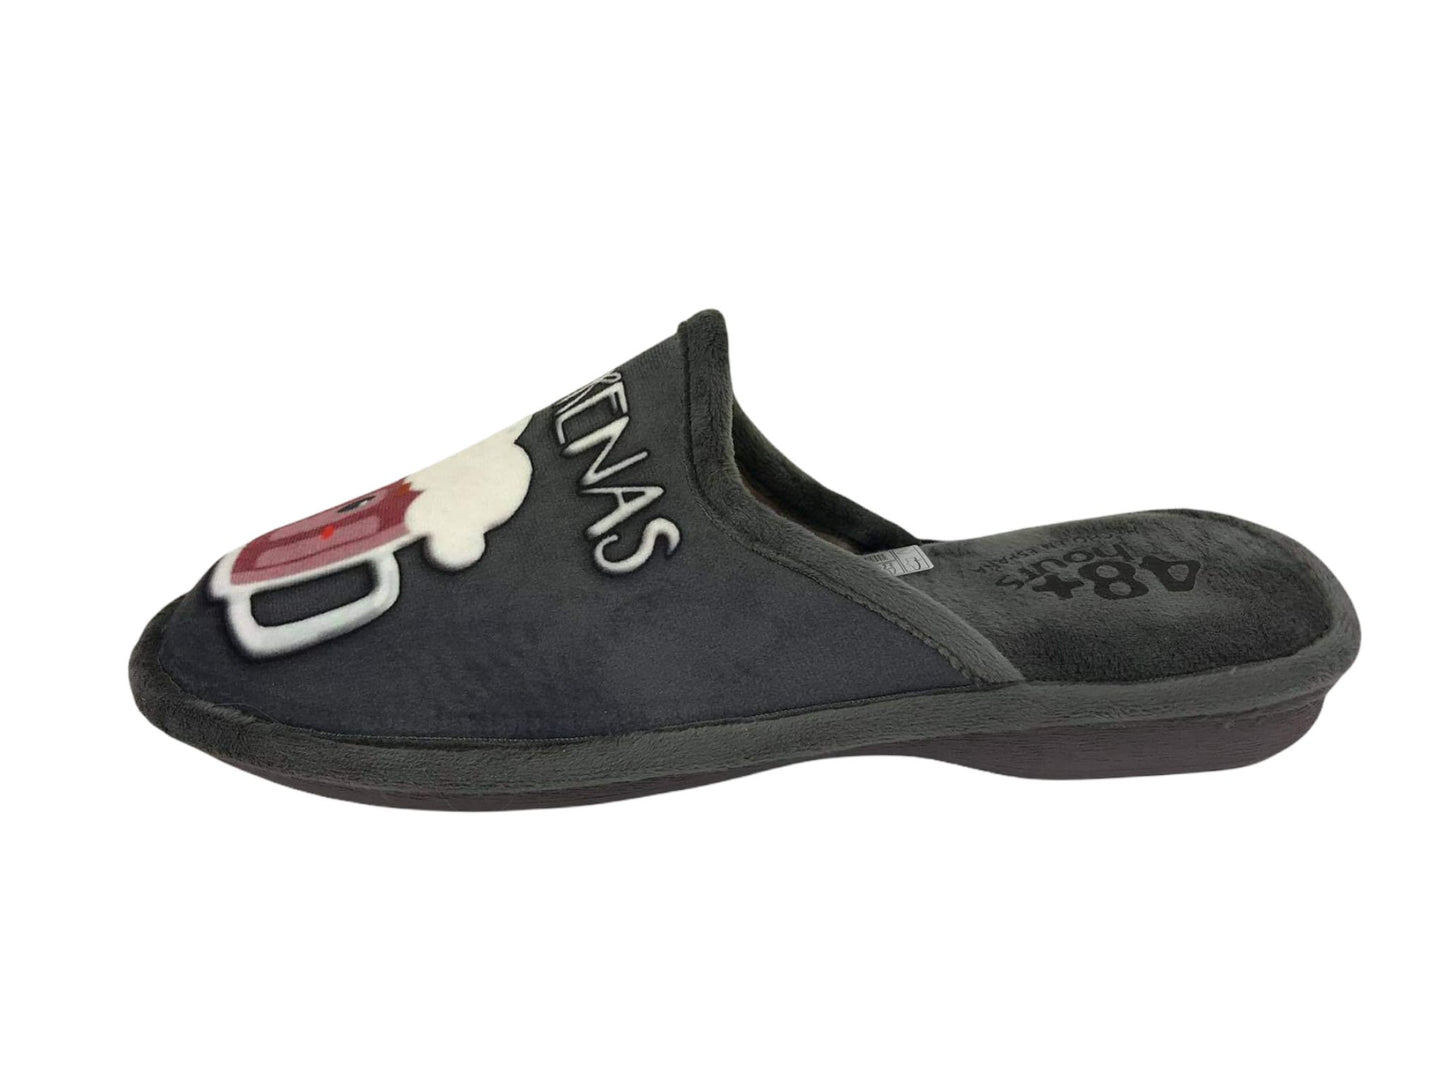 48Hours| Barefoot men's house slippers Blondes and Brunettes gray